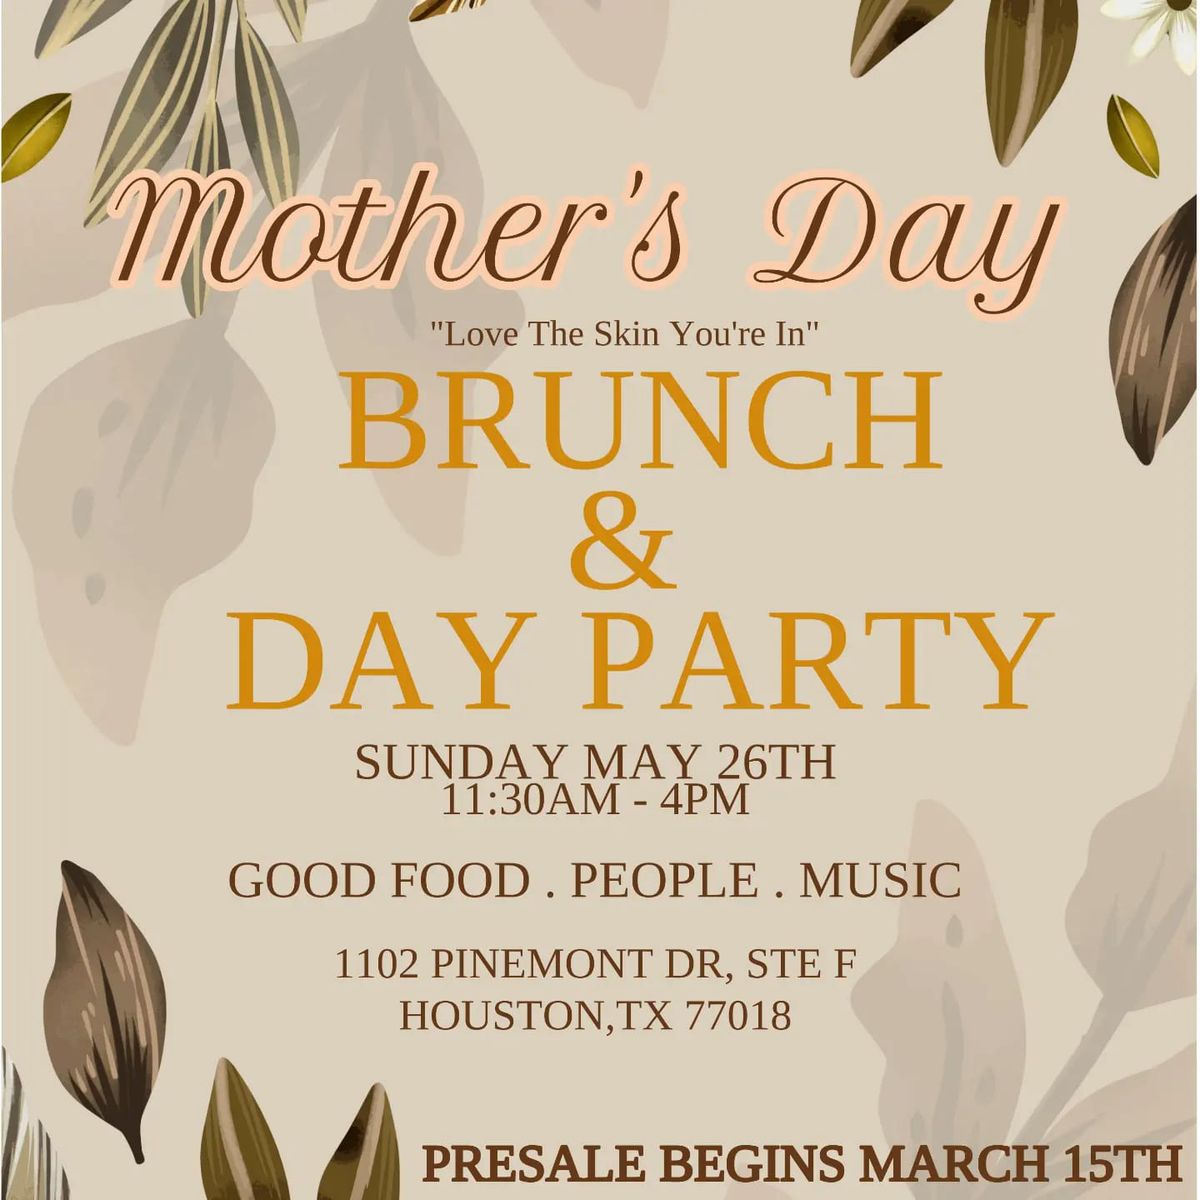 Mother's Day "Loving The Skin You're In" Brunch & Day Party 